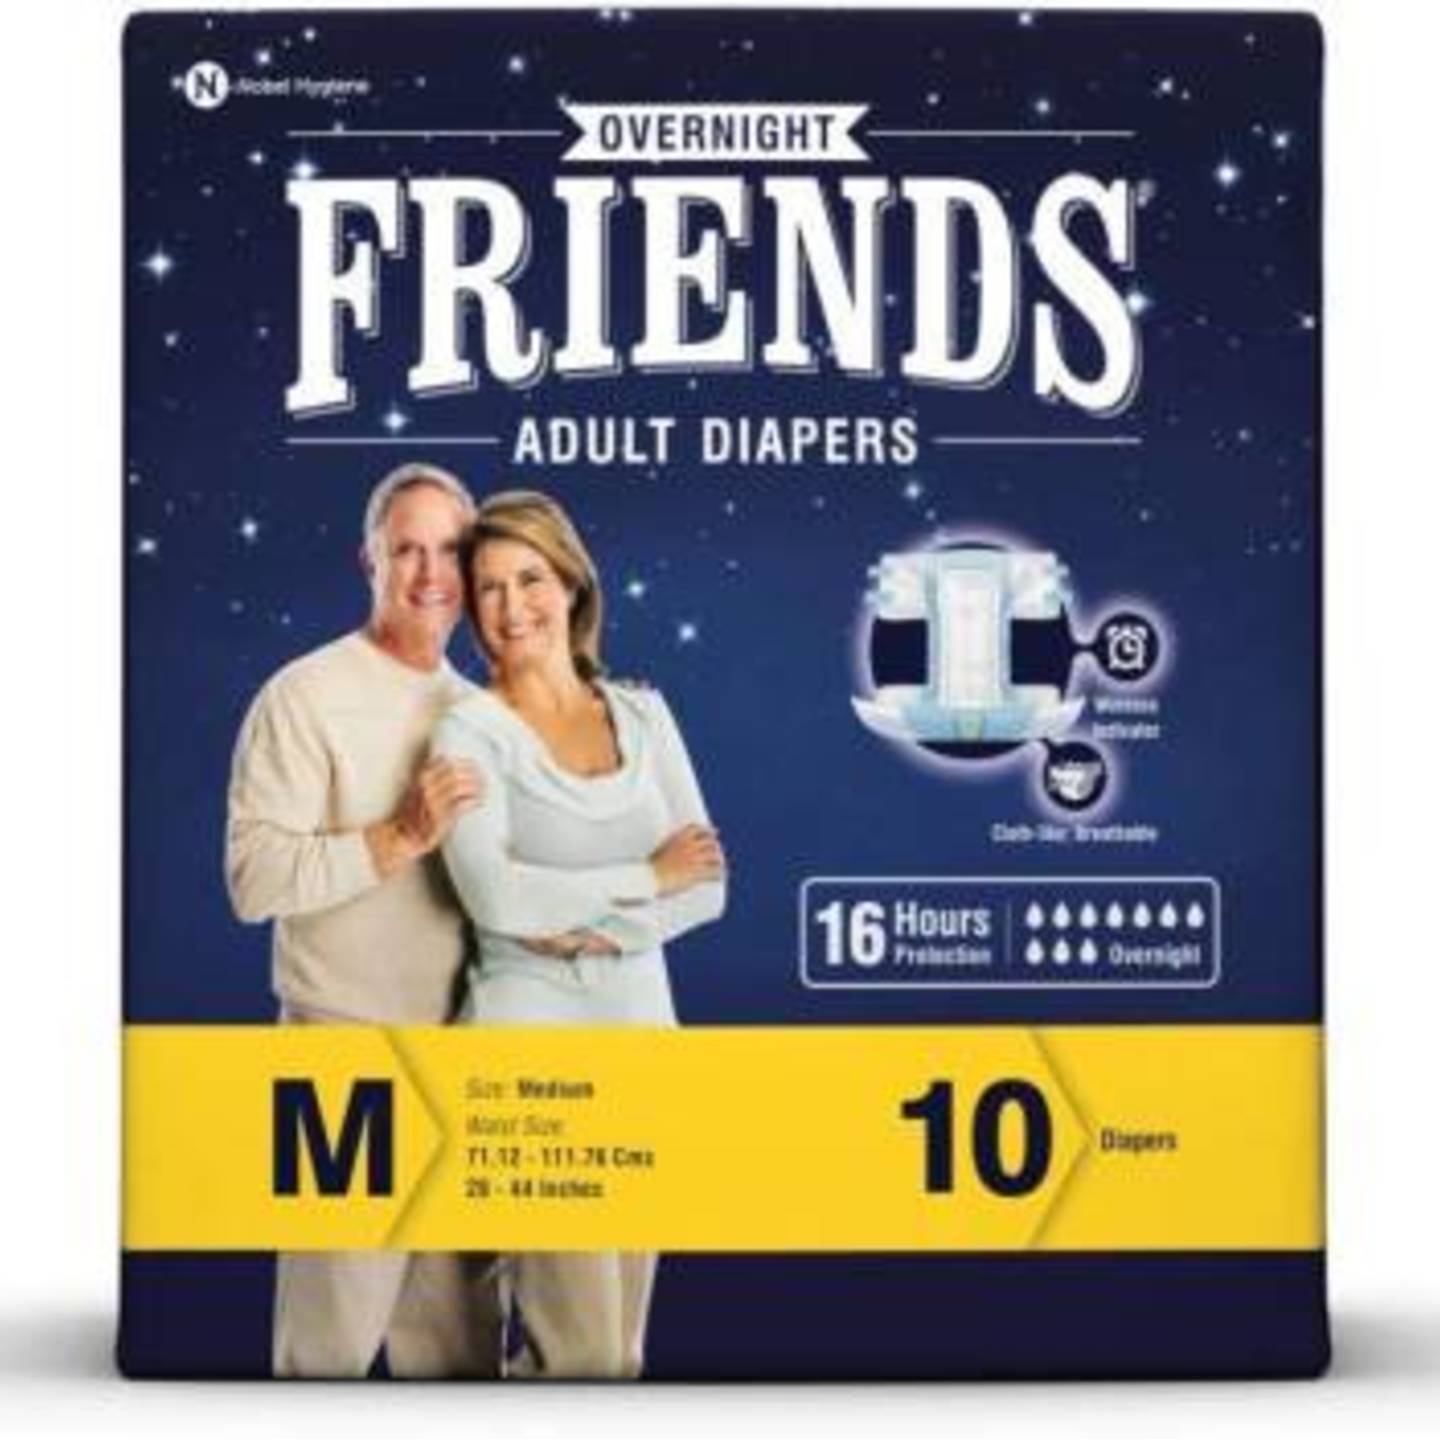 FRIENDS OVERNIGHT ADULT DIAPERS MEDIUM, PACK OF 3  30 Pcs., WITH UPTO 16 HOURS PROTECTION